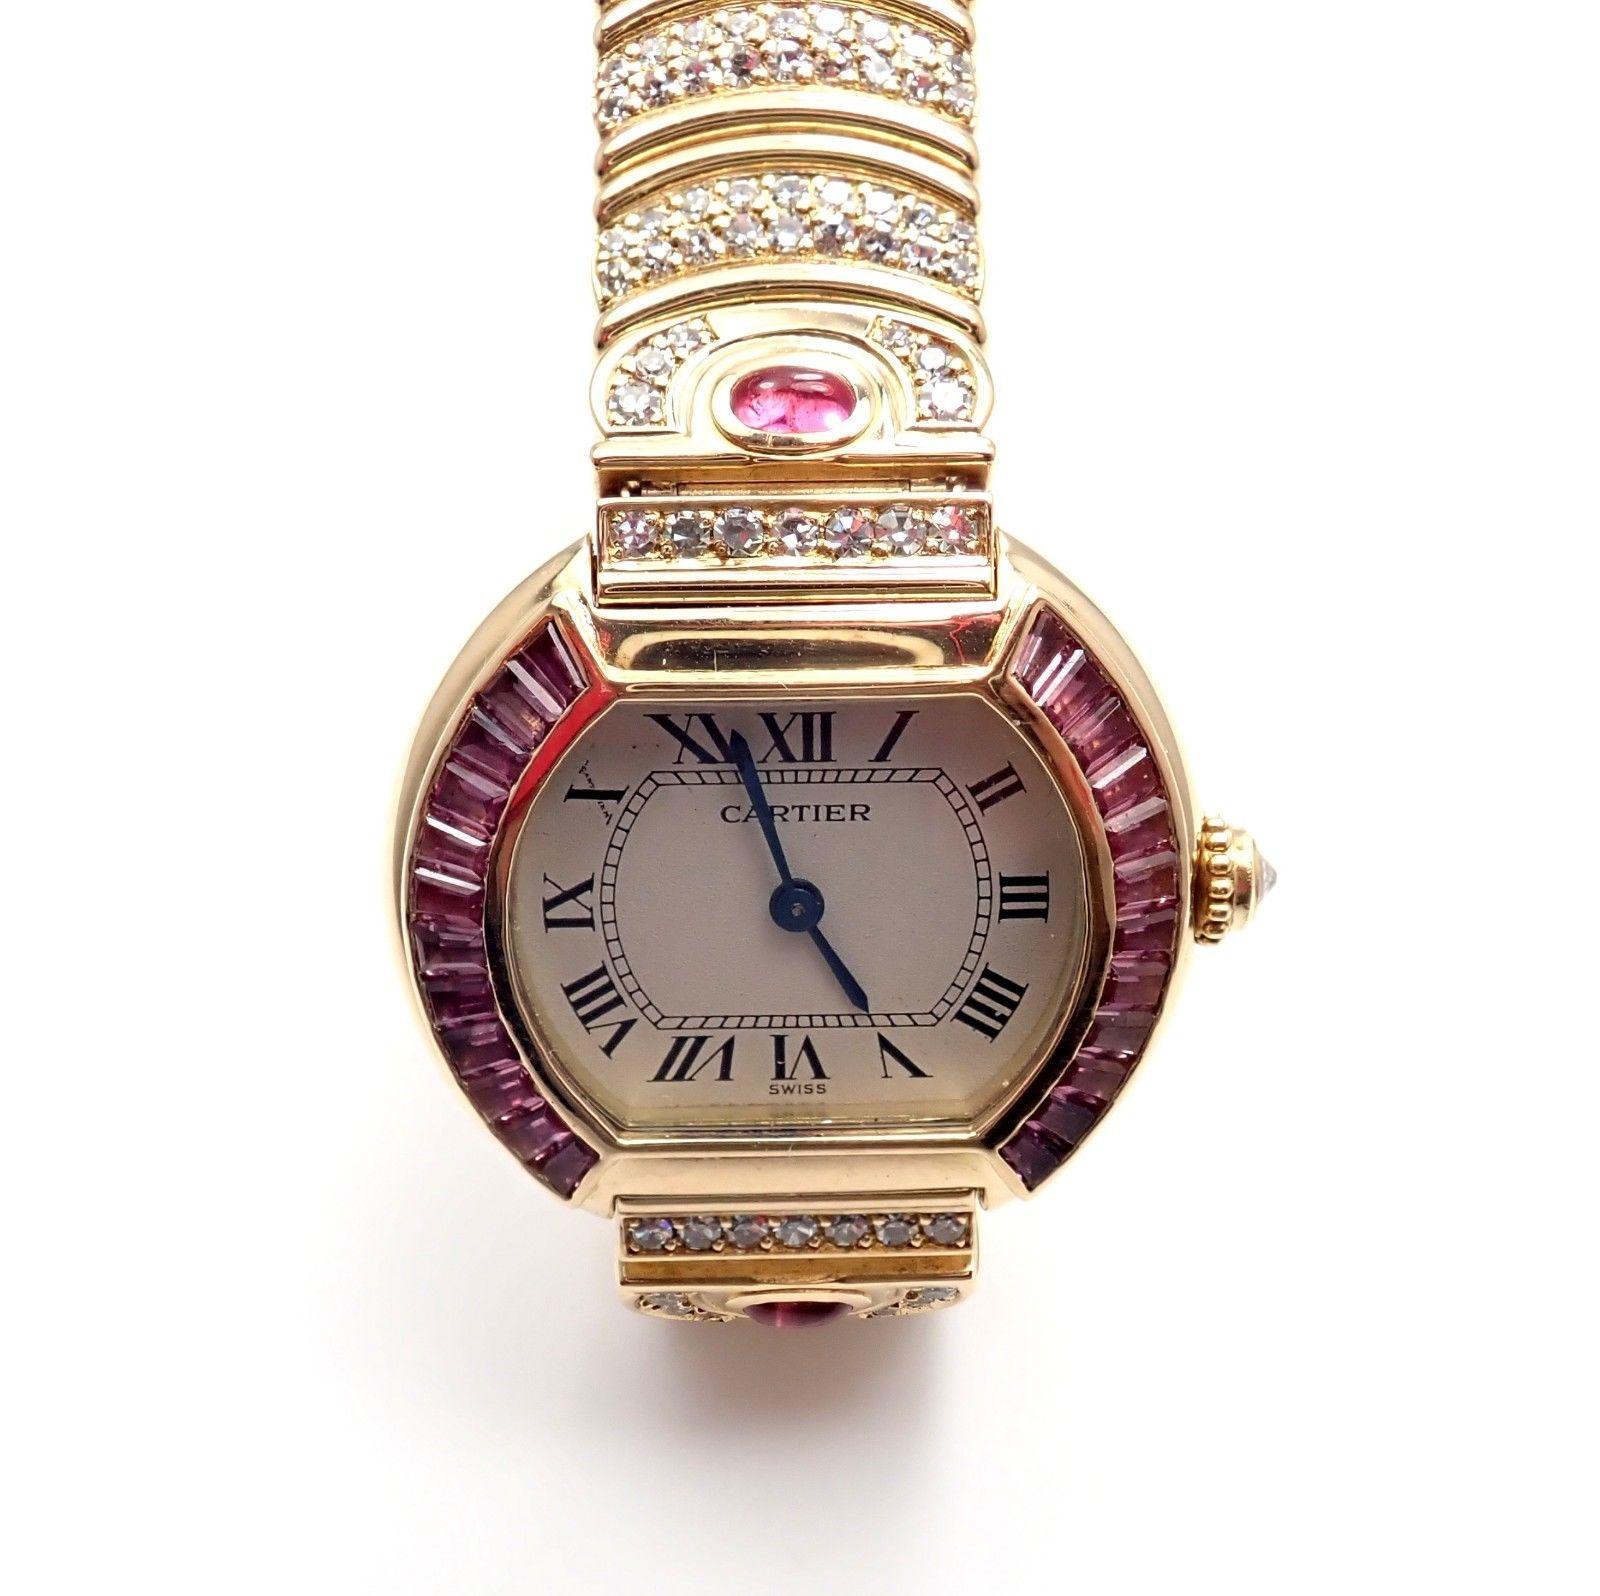 18k yellow gold and diamond and pink sapphire lady's Bagnoire wristwatch by Cartier. 
With original Cartier Diamonds: 1 on crown, 358x on band and case. Approx 4ctw. VVS2 Clarity, G Color.
Original Pink Sapphire: 2x Cabochon, 24